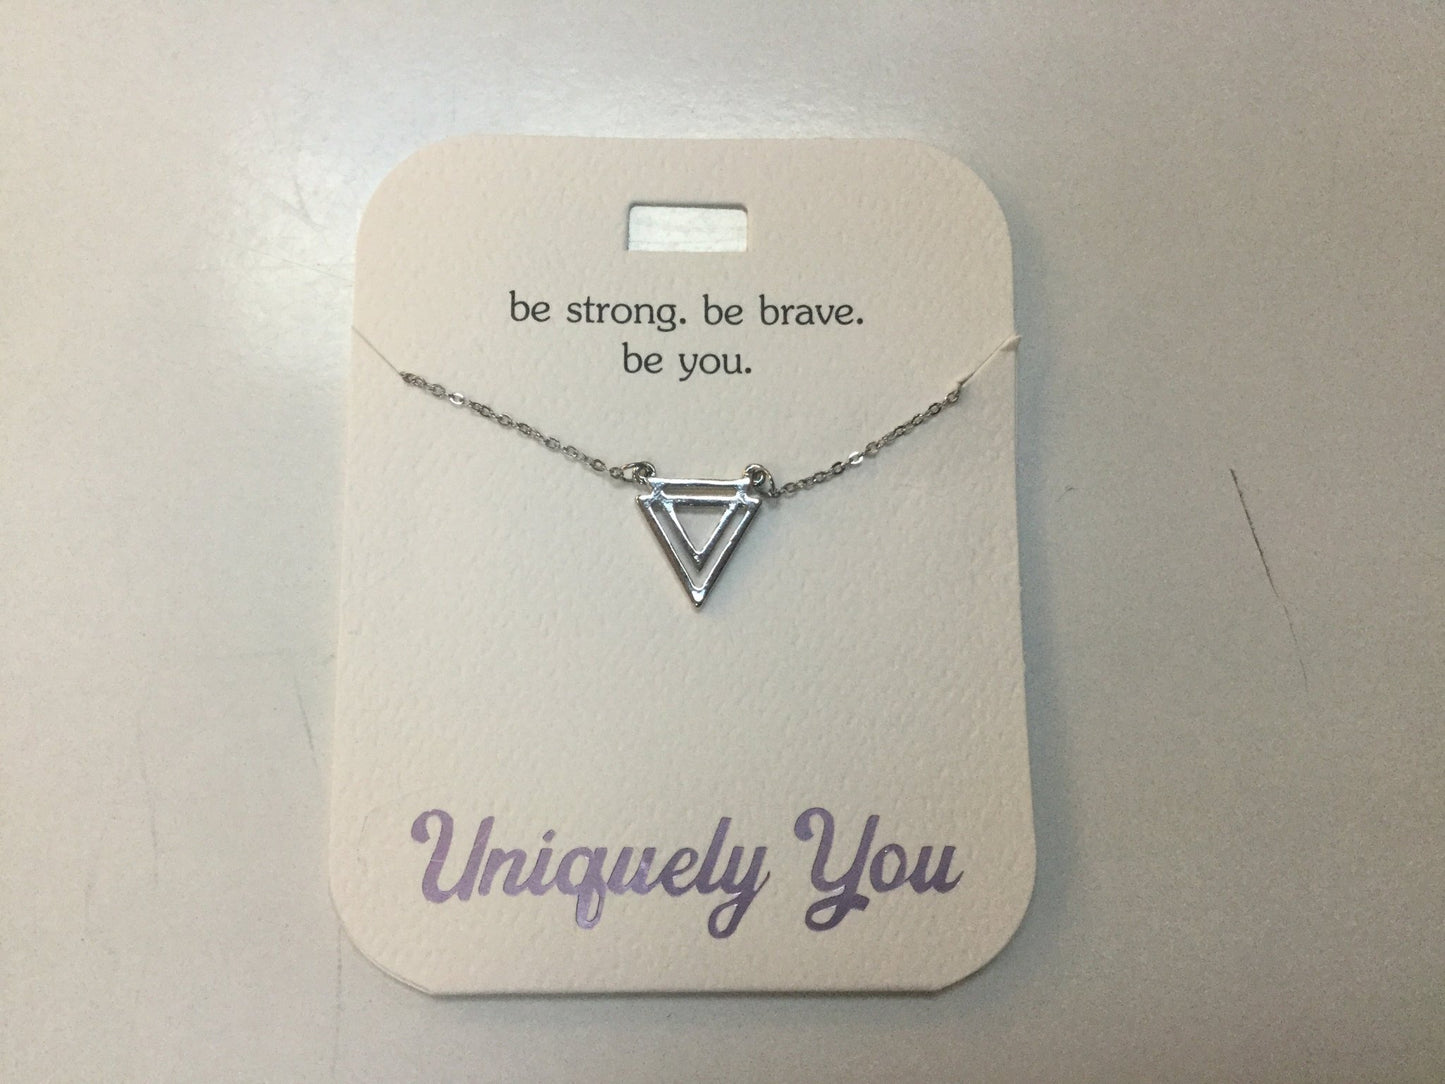 Necklace - YOU 4020 - Be strong. Be brave. Be you.